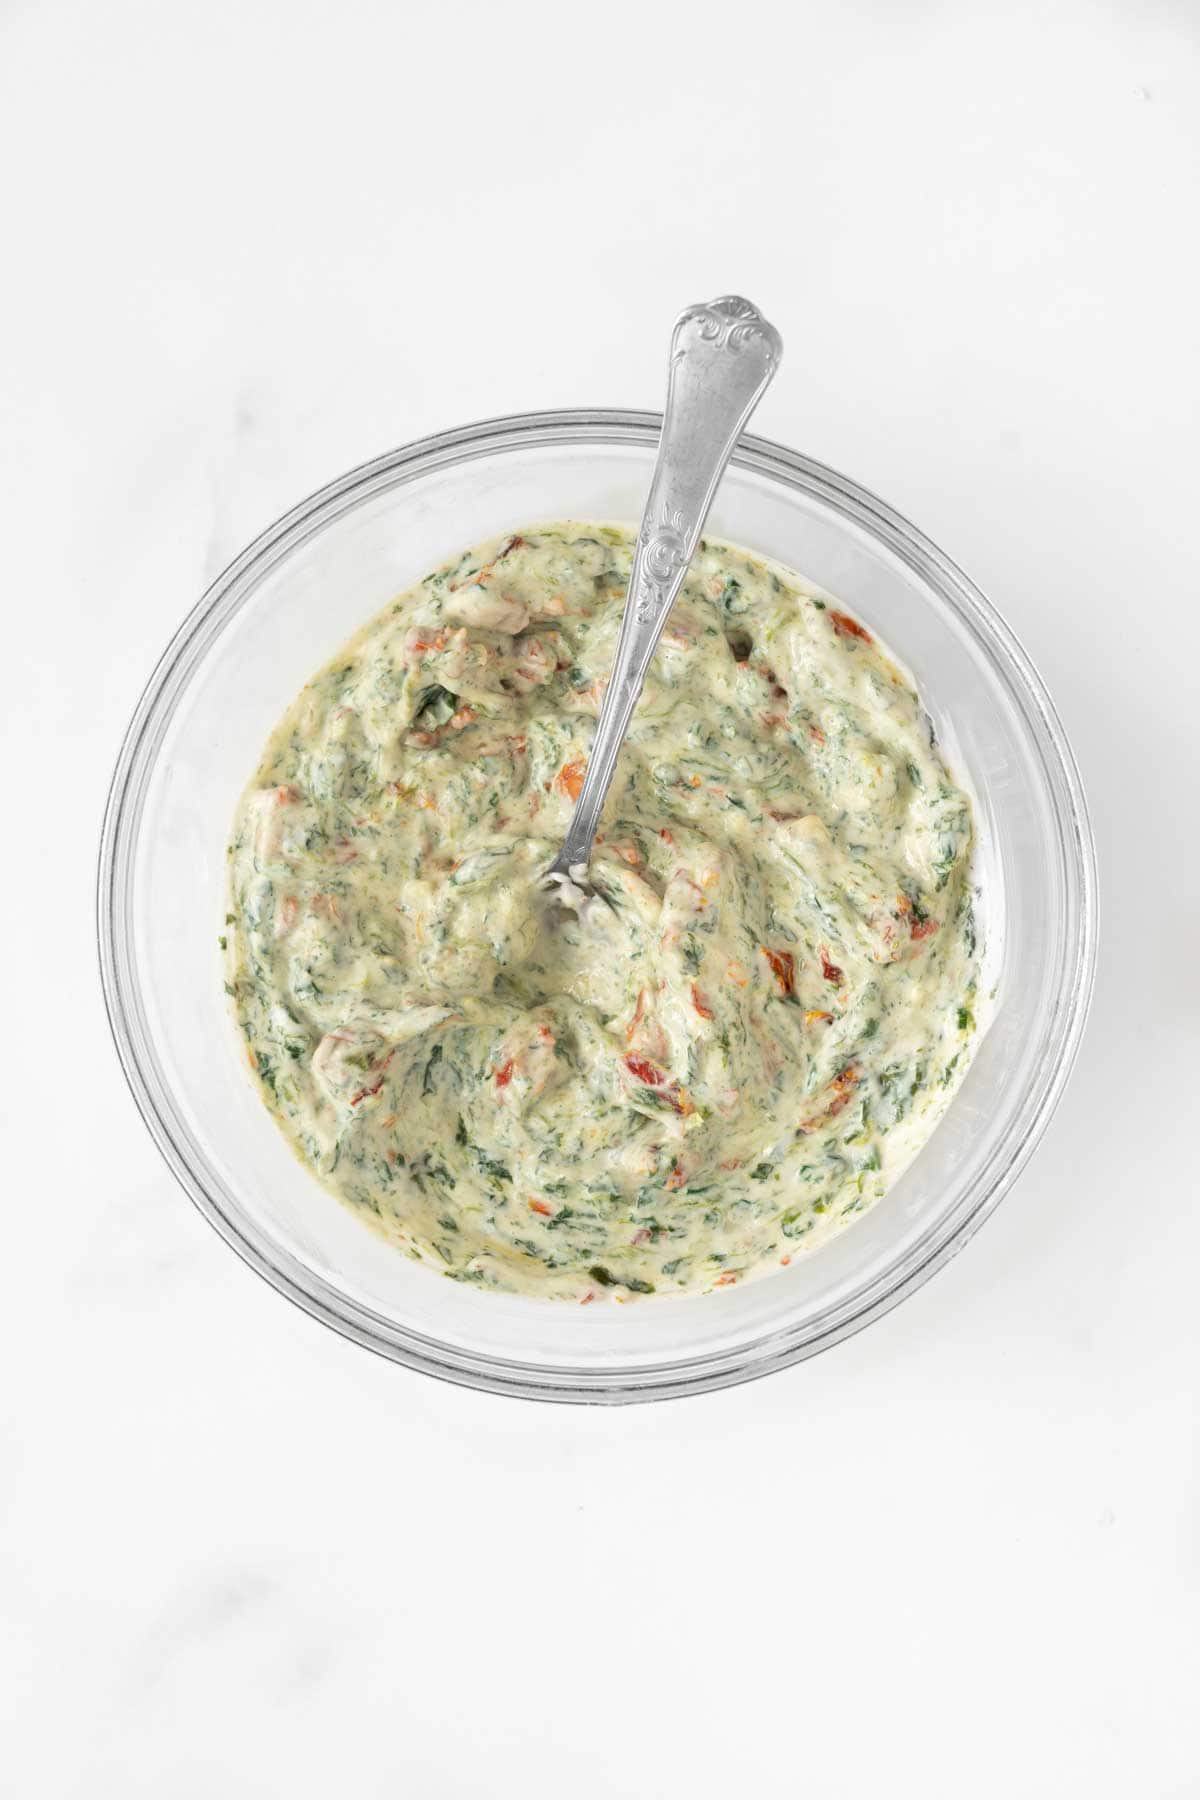 A cream cheese mix with herbs and vegetables in a bowl.